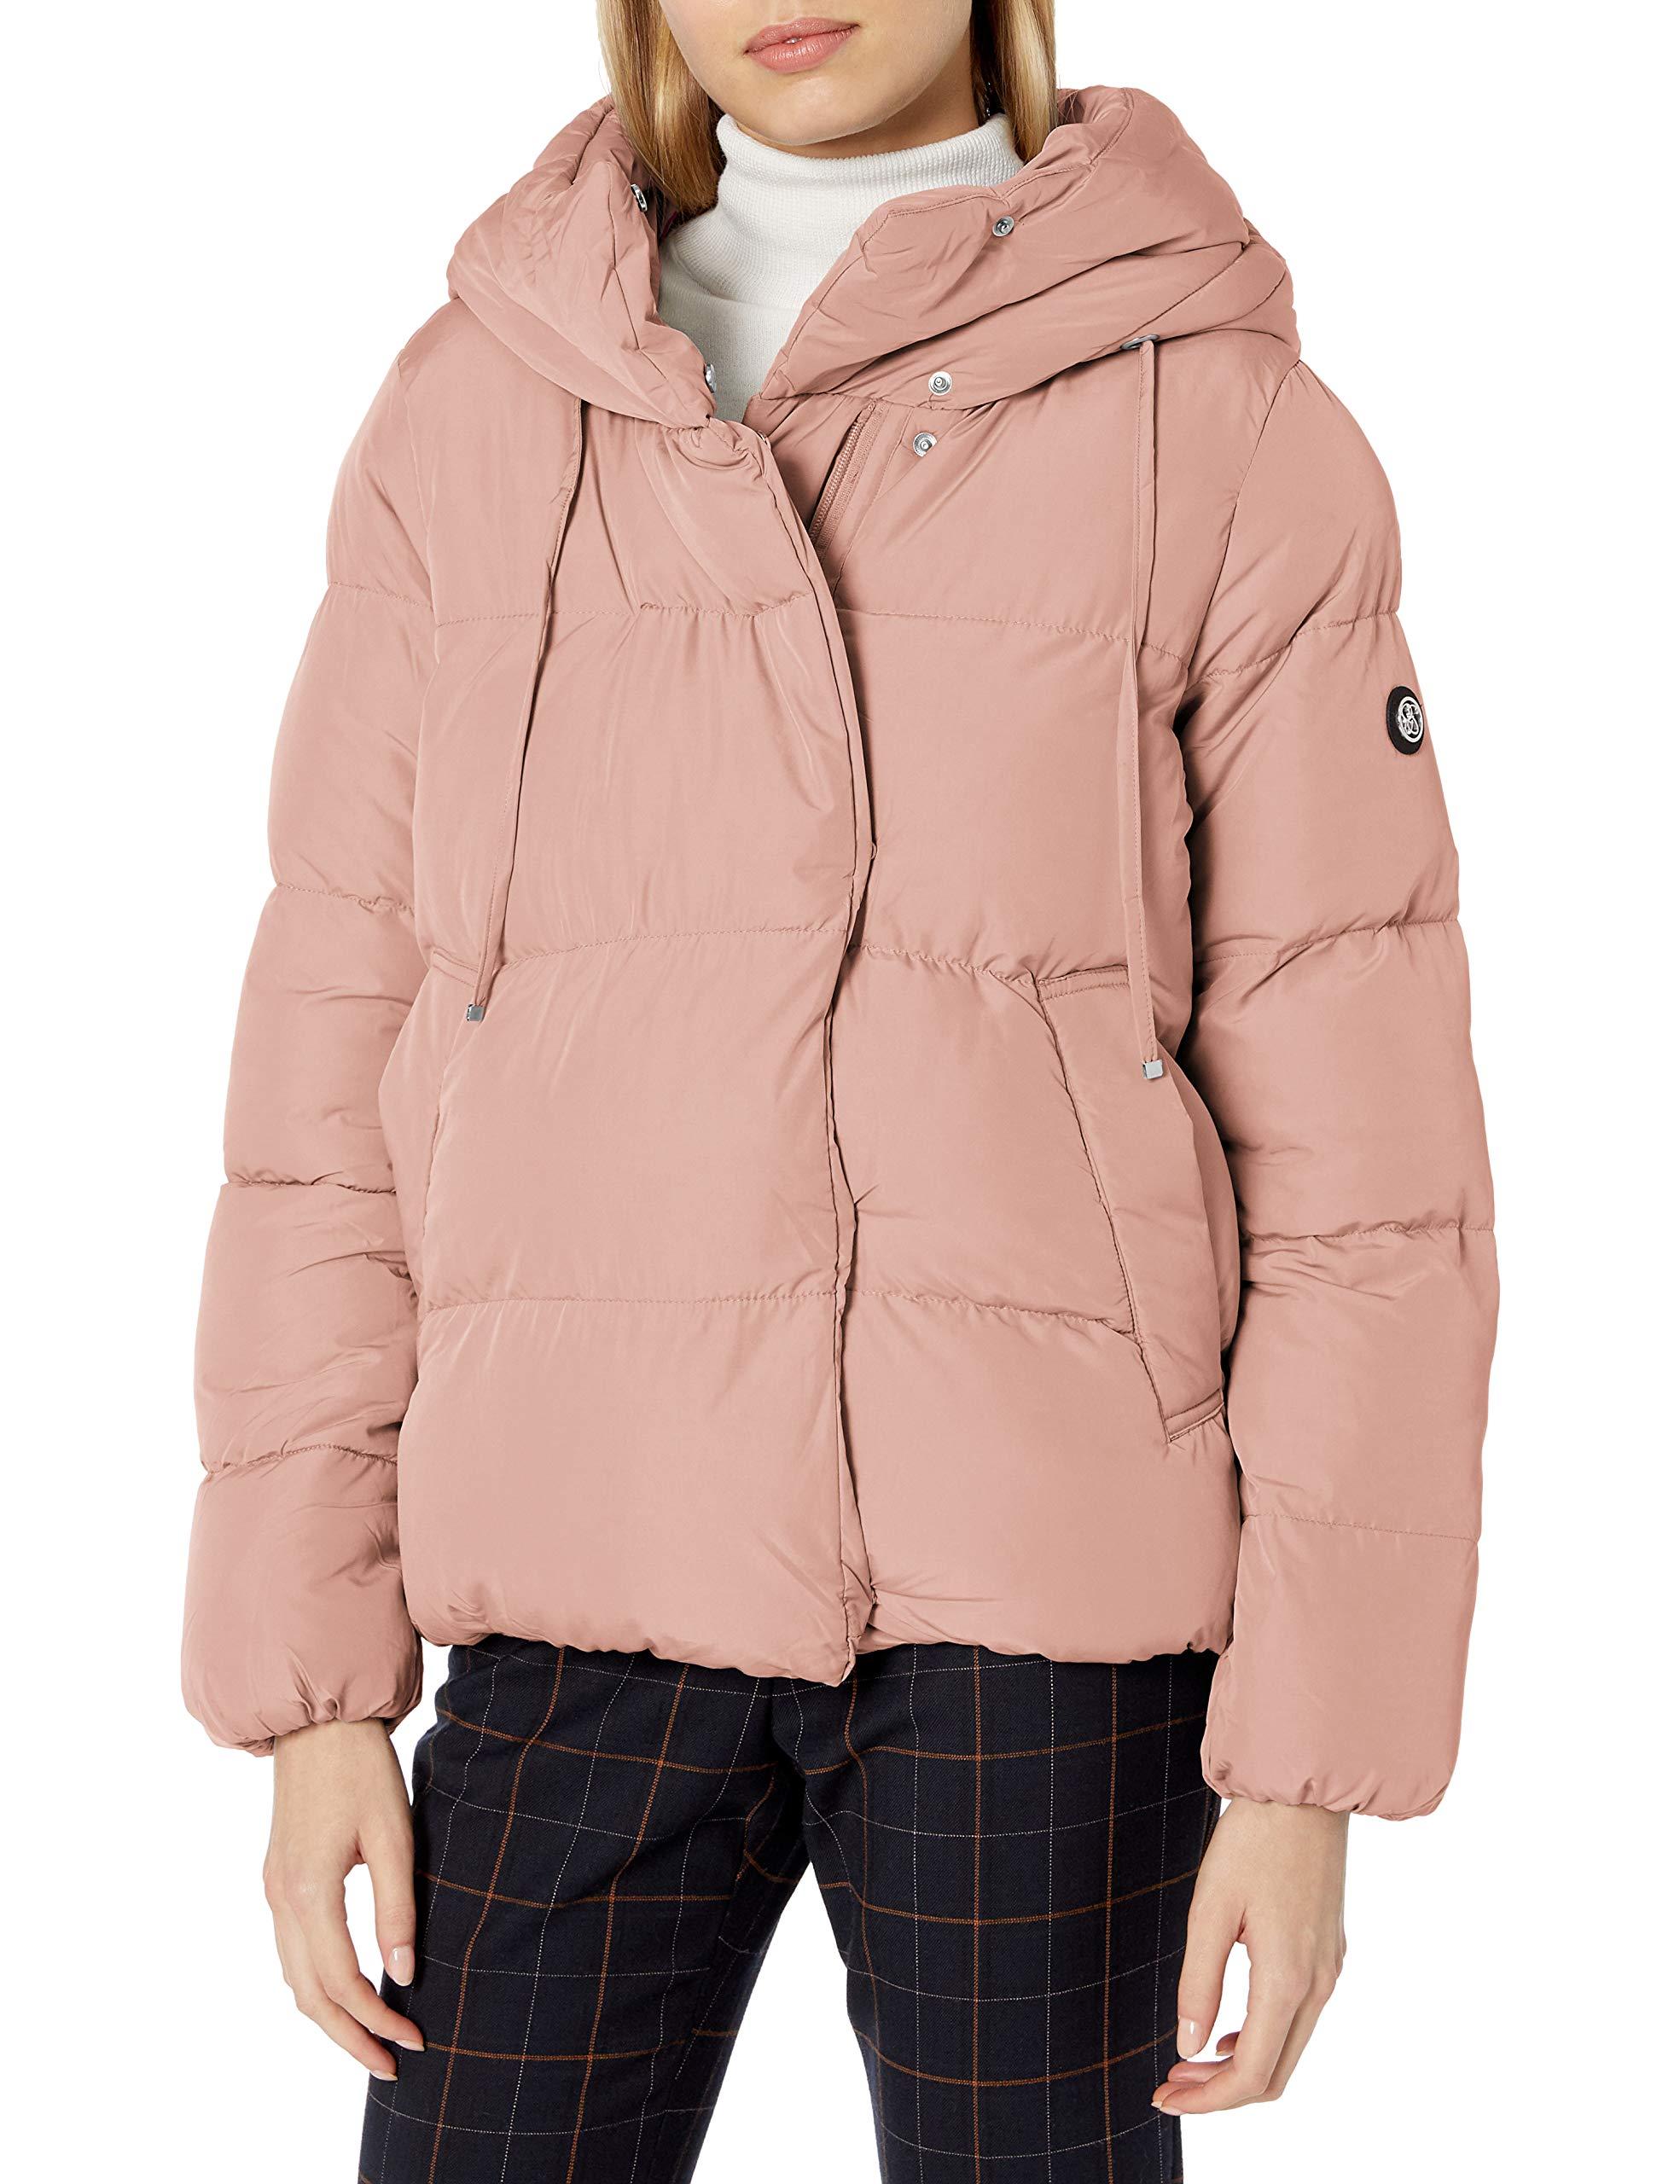 Jessica Simpson Puffer Jacket in Pink - Lyst